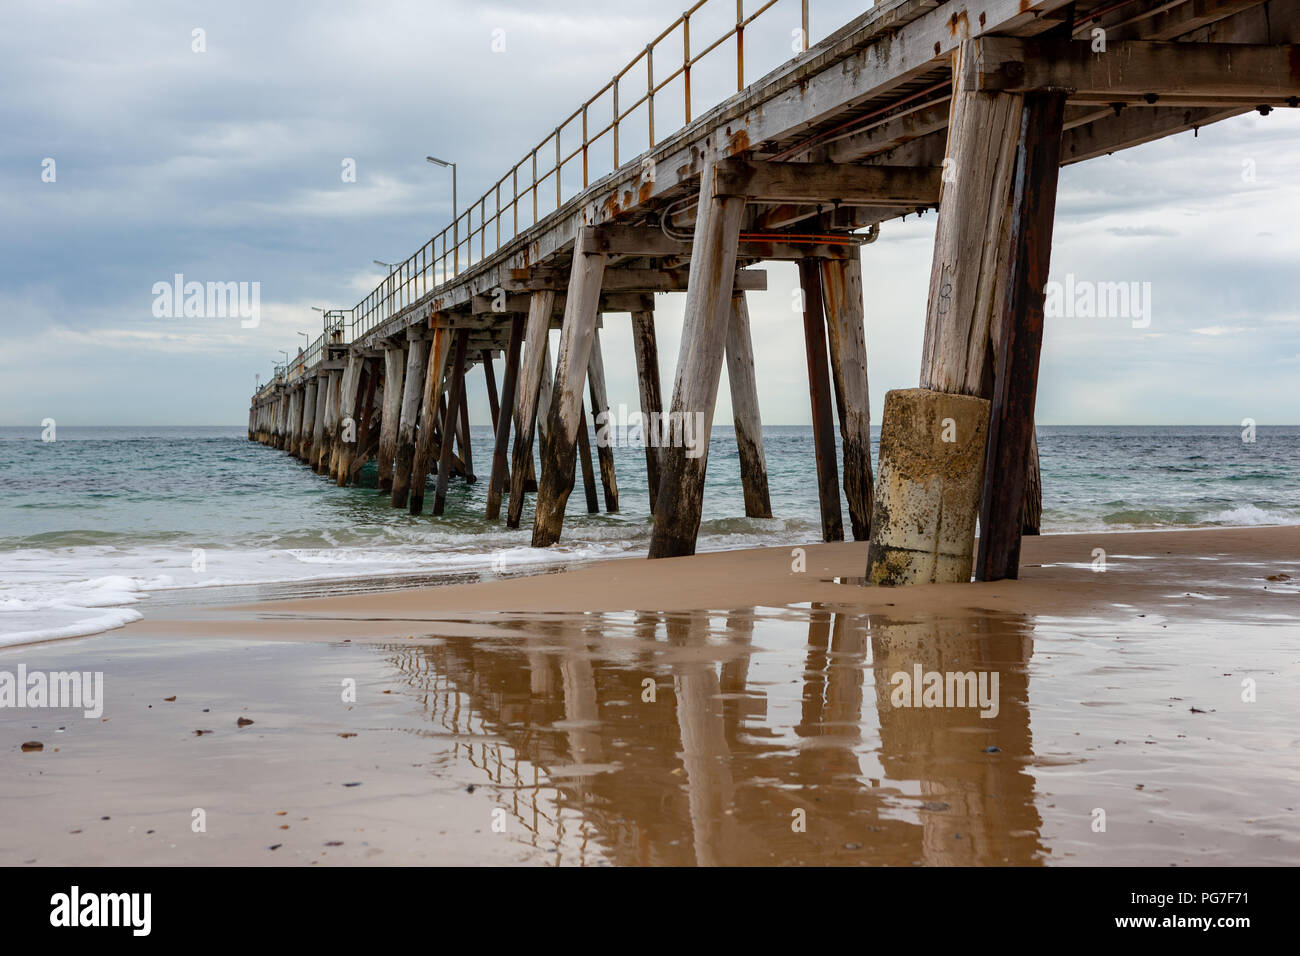 The iconic Port Noarlunga Jetty and its reflection in the water below locatedin South Australia on 23rd August 2018 Stock Photo